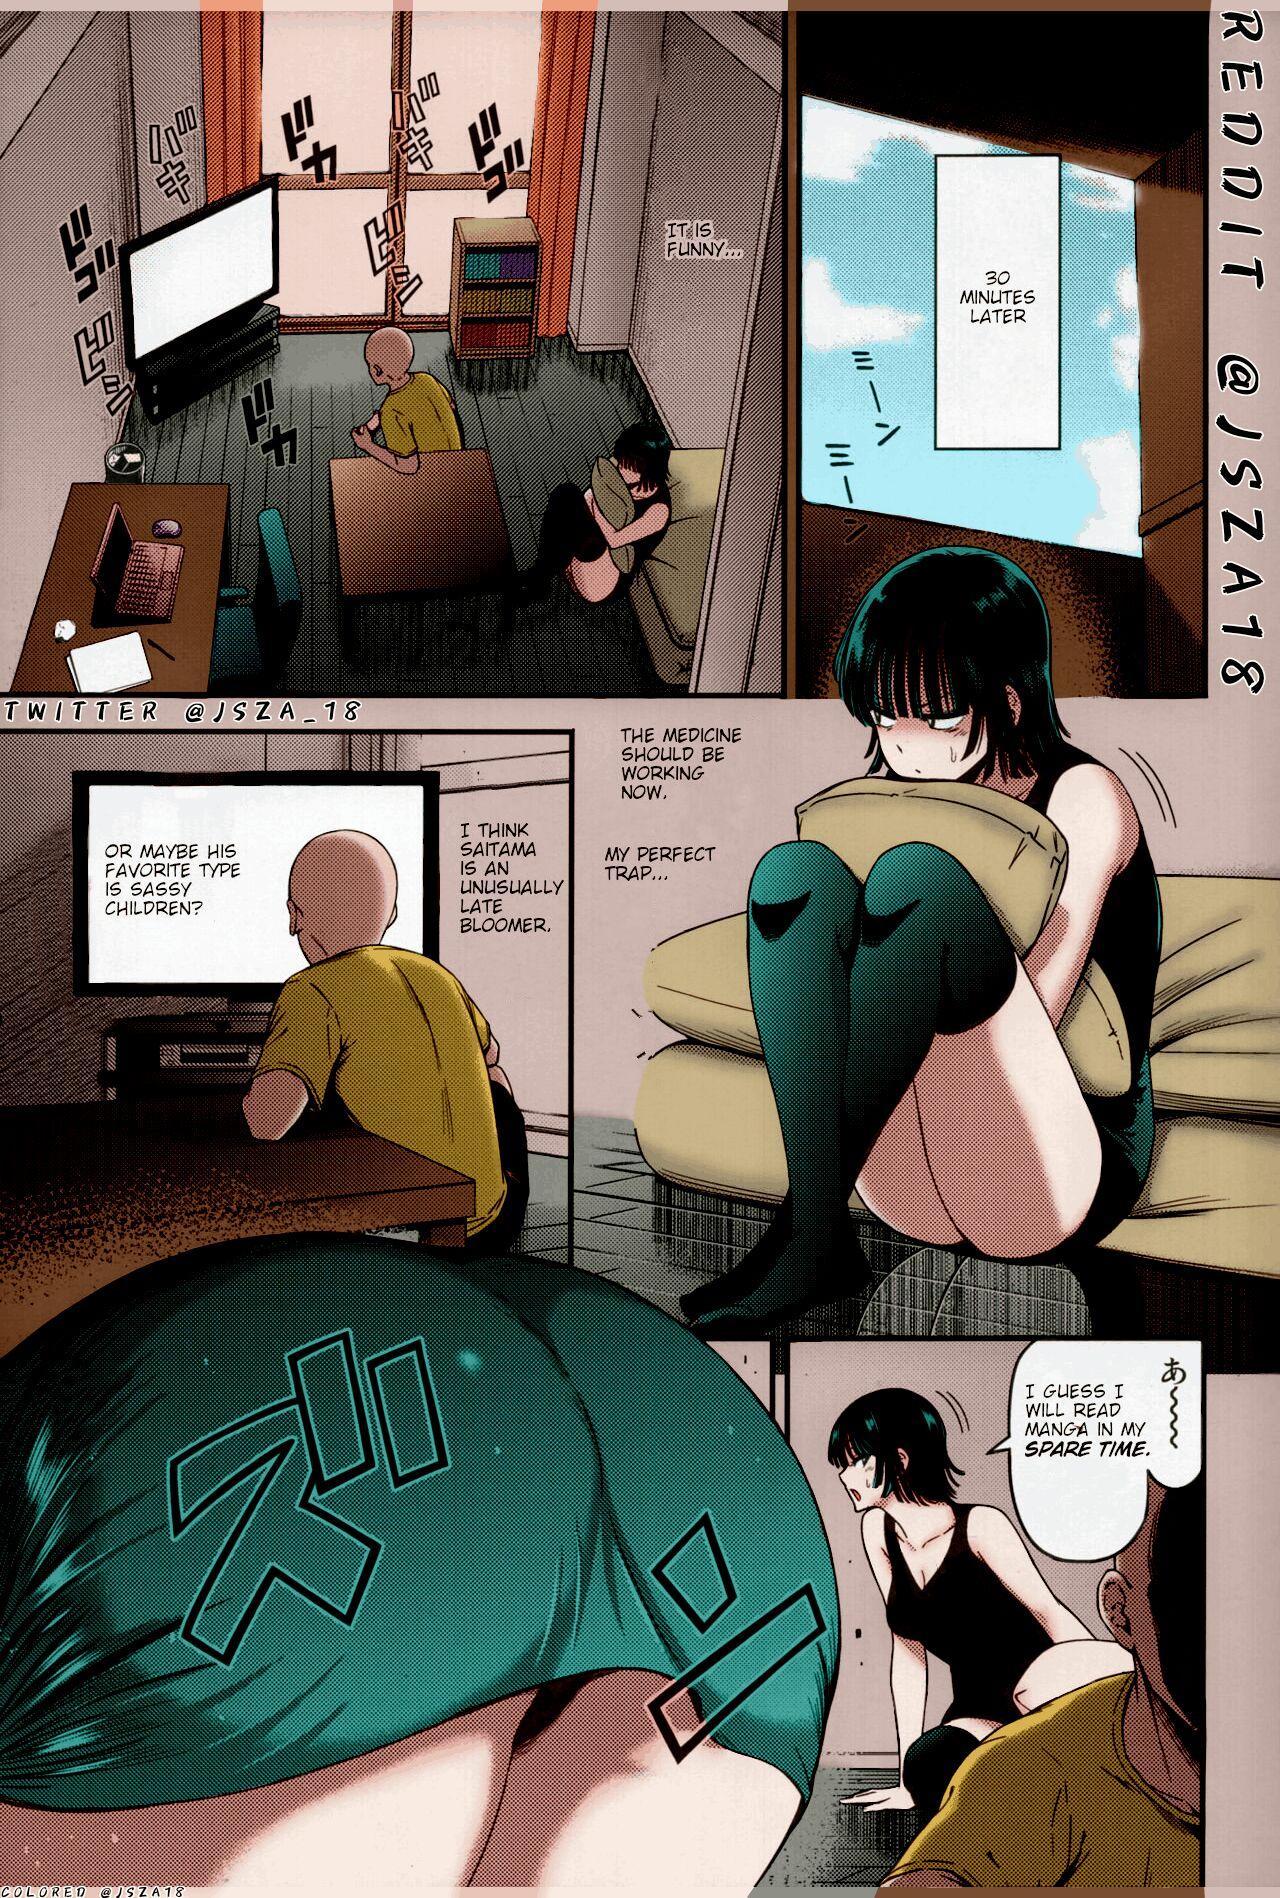 Swallowing ONE-HURRICANE 6 - One punch man Fisting - Page 6